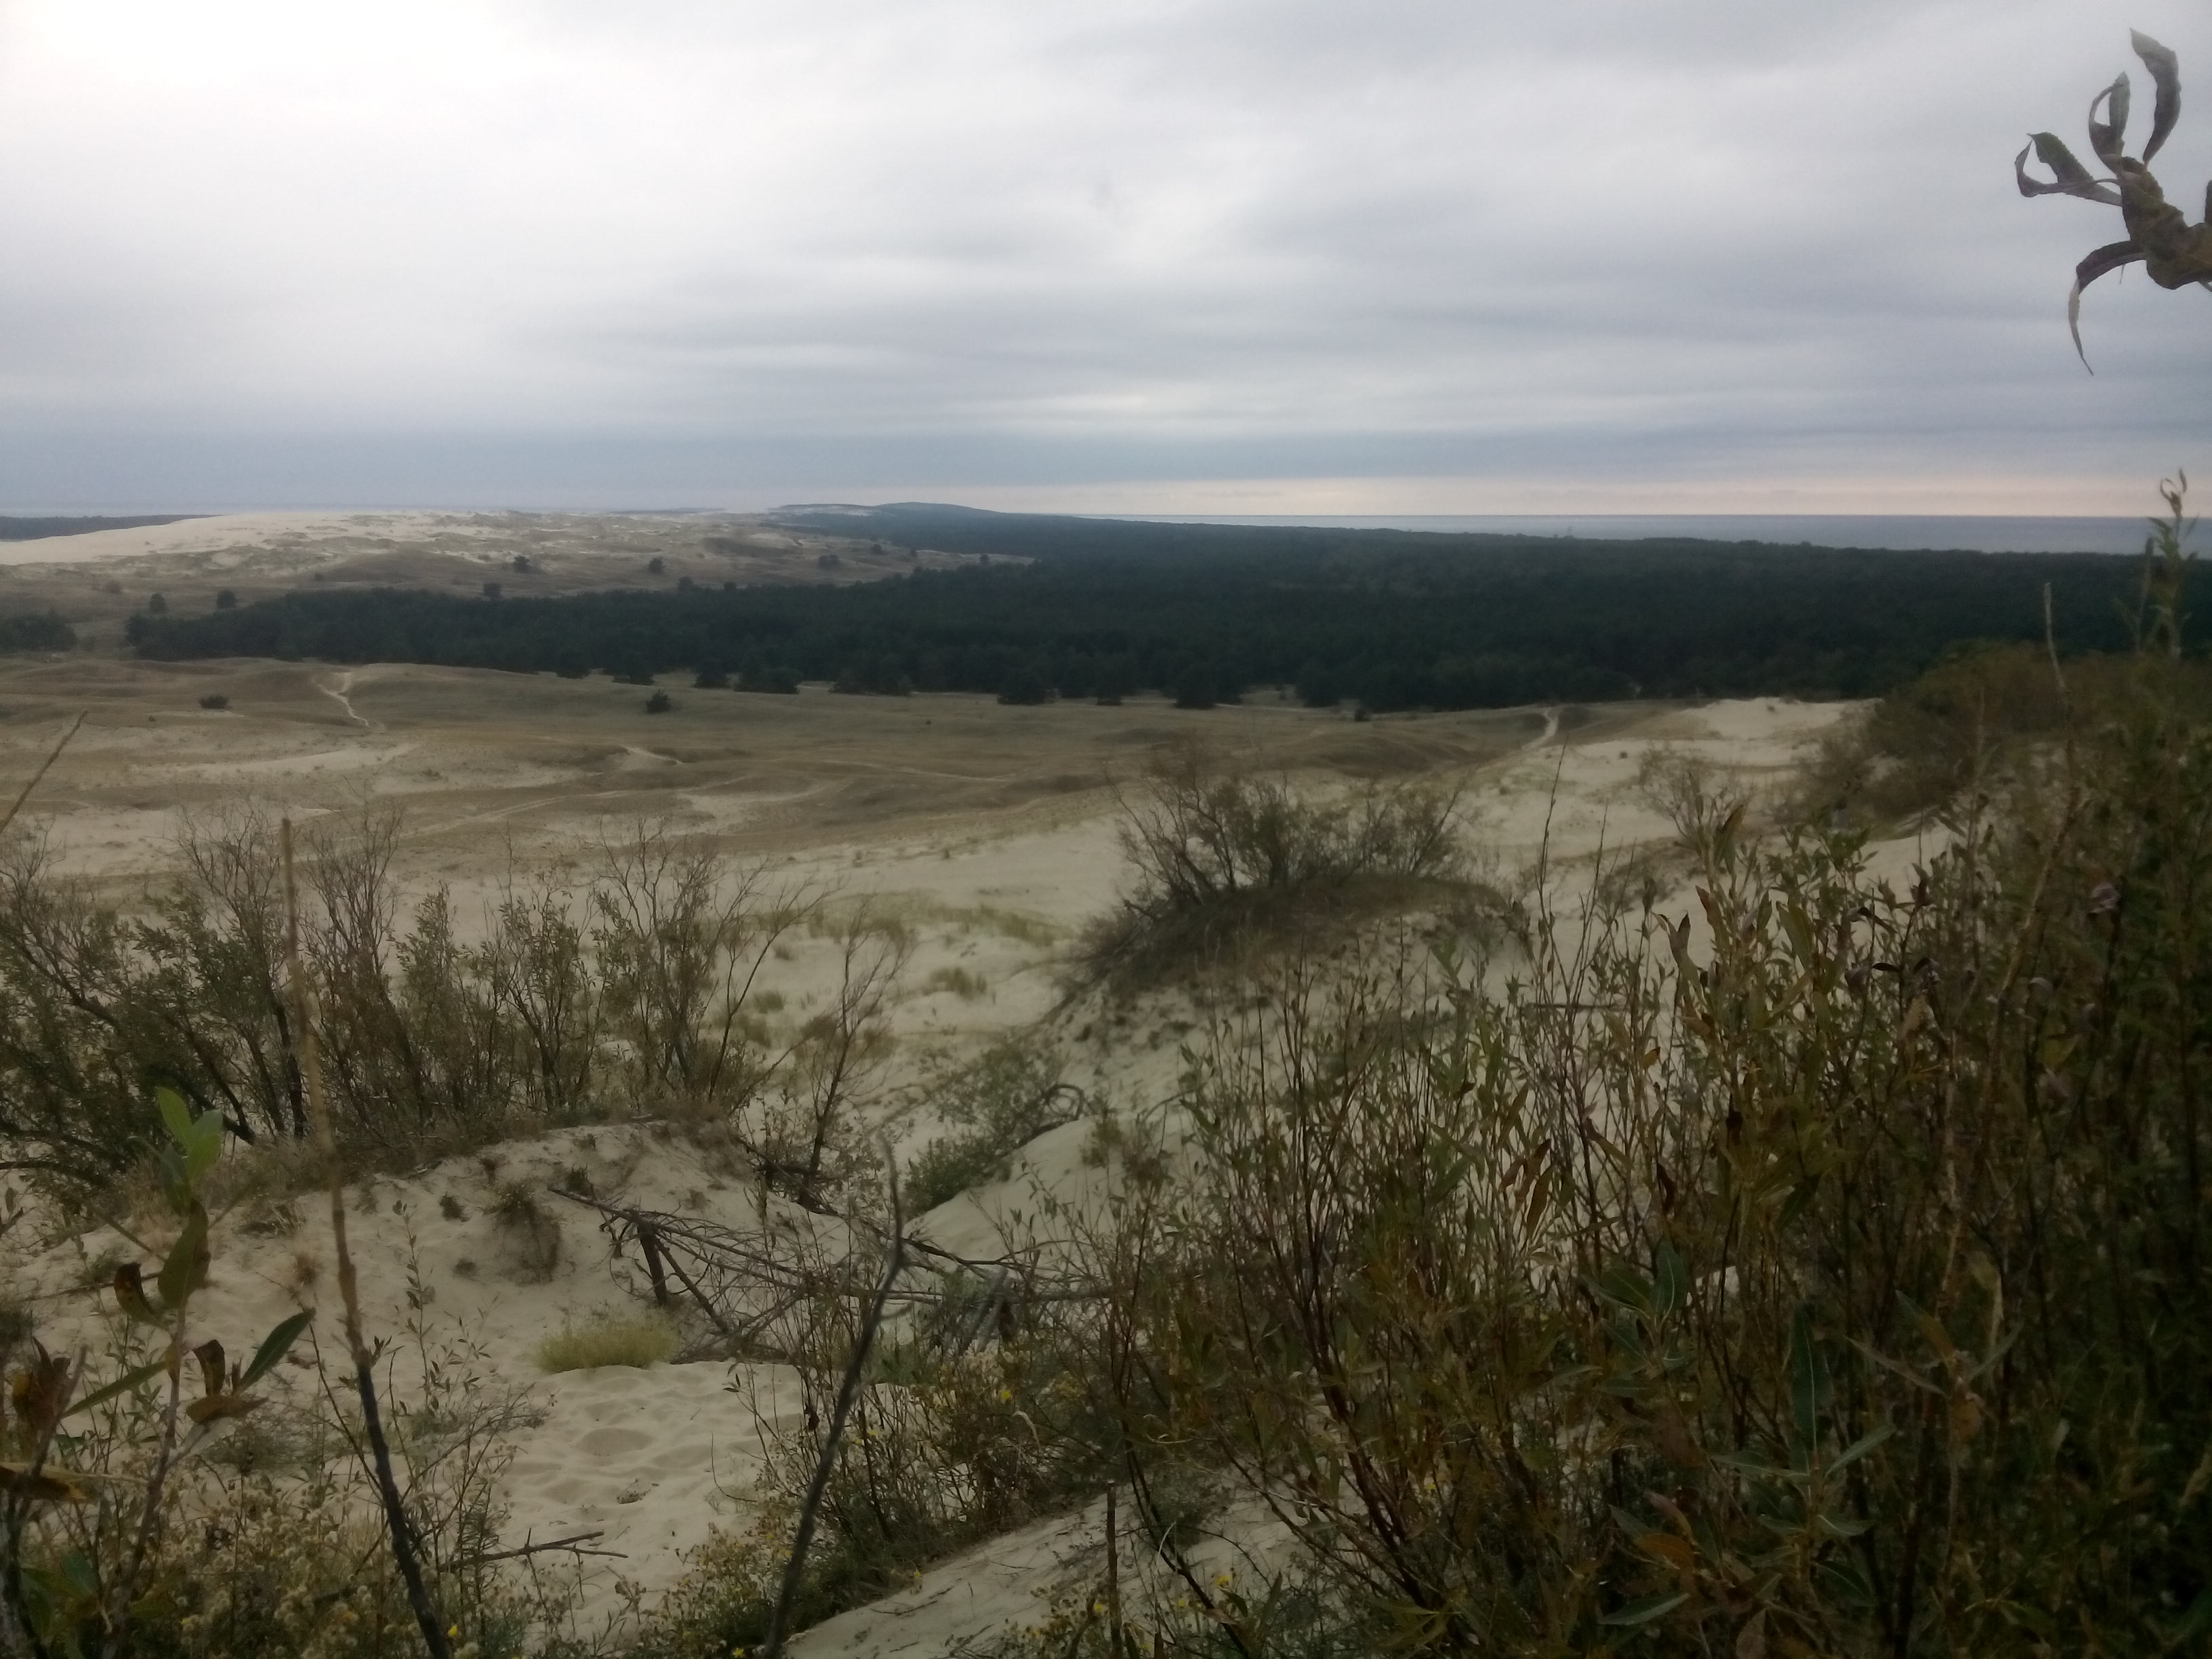 A view to distant forests across grassy dunes